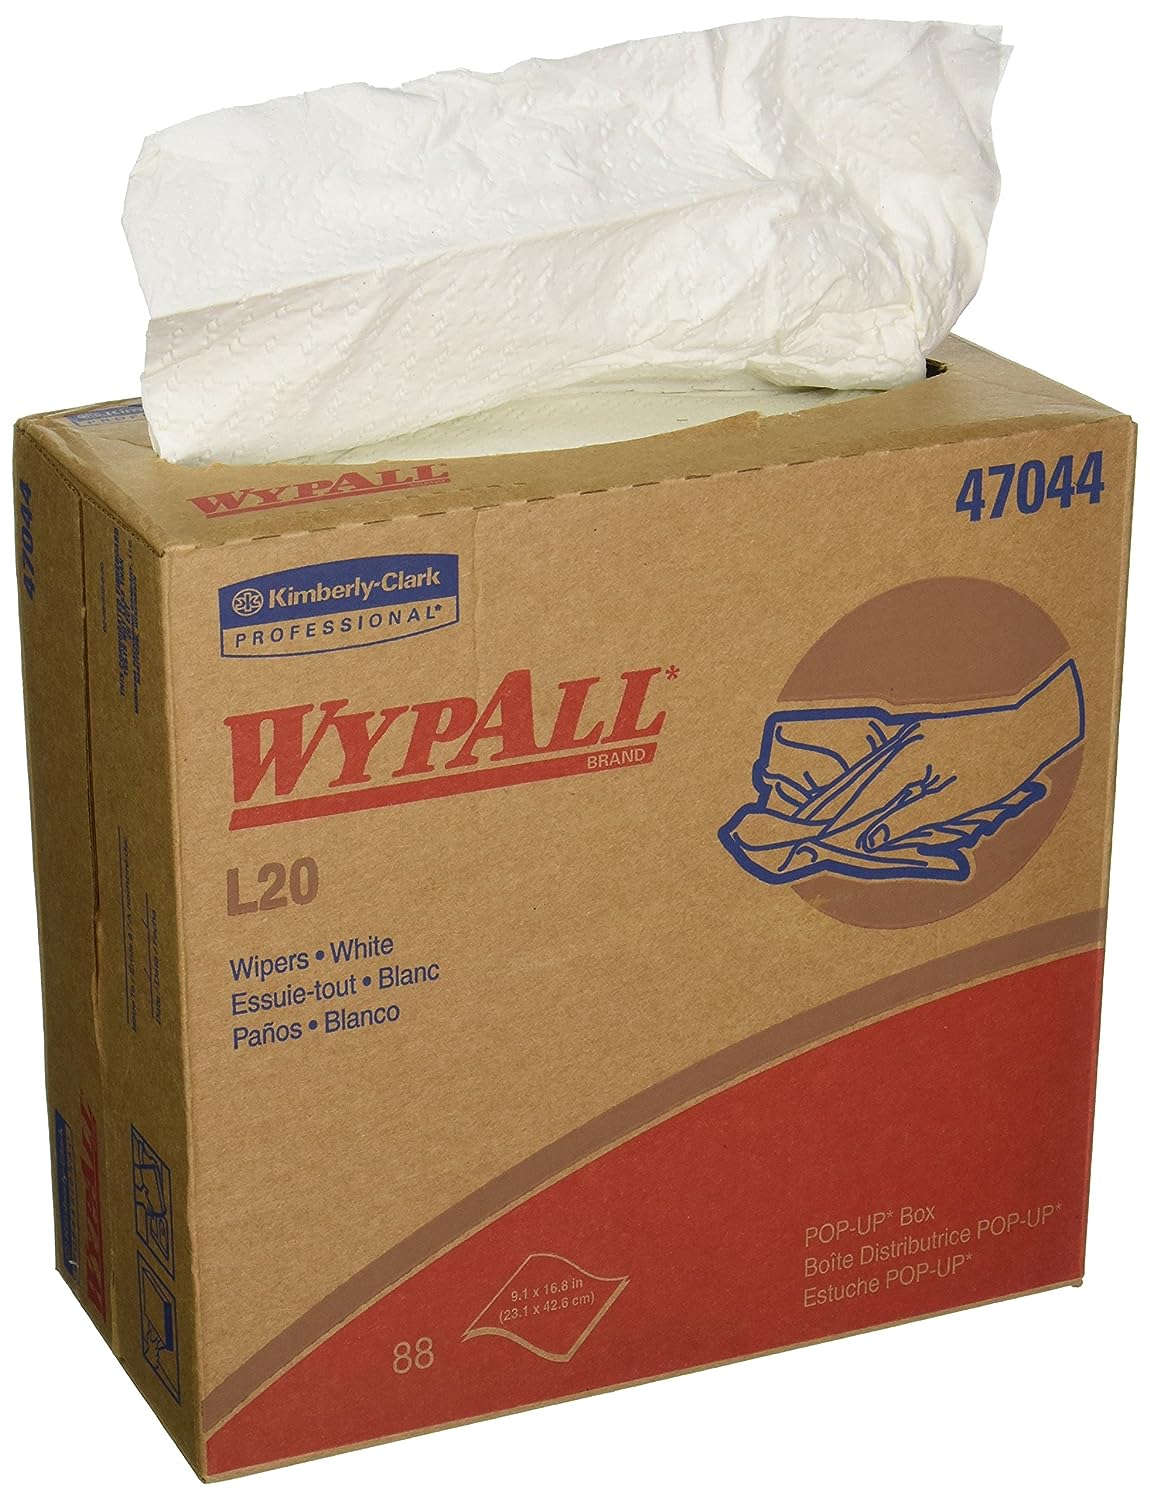 WypAll® General Clean L20 Medium Cleaning Cloths (47044), Pop-Up Box, White, 10 Boxes/Case, 88 Sheets/Box